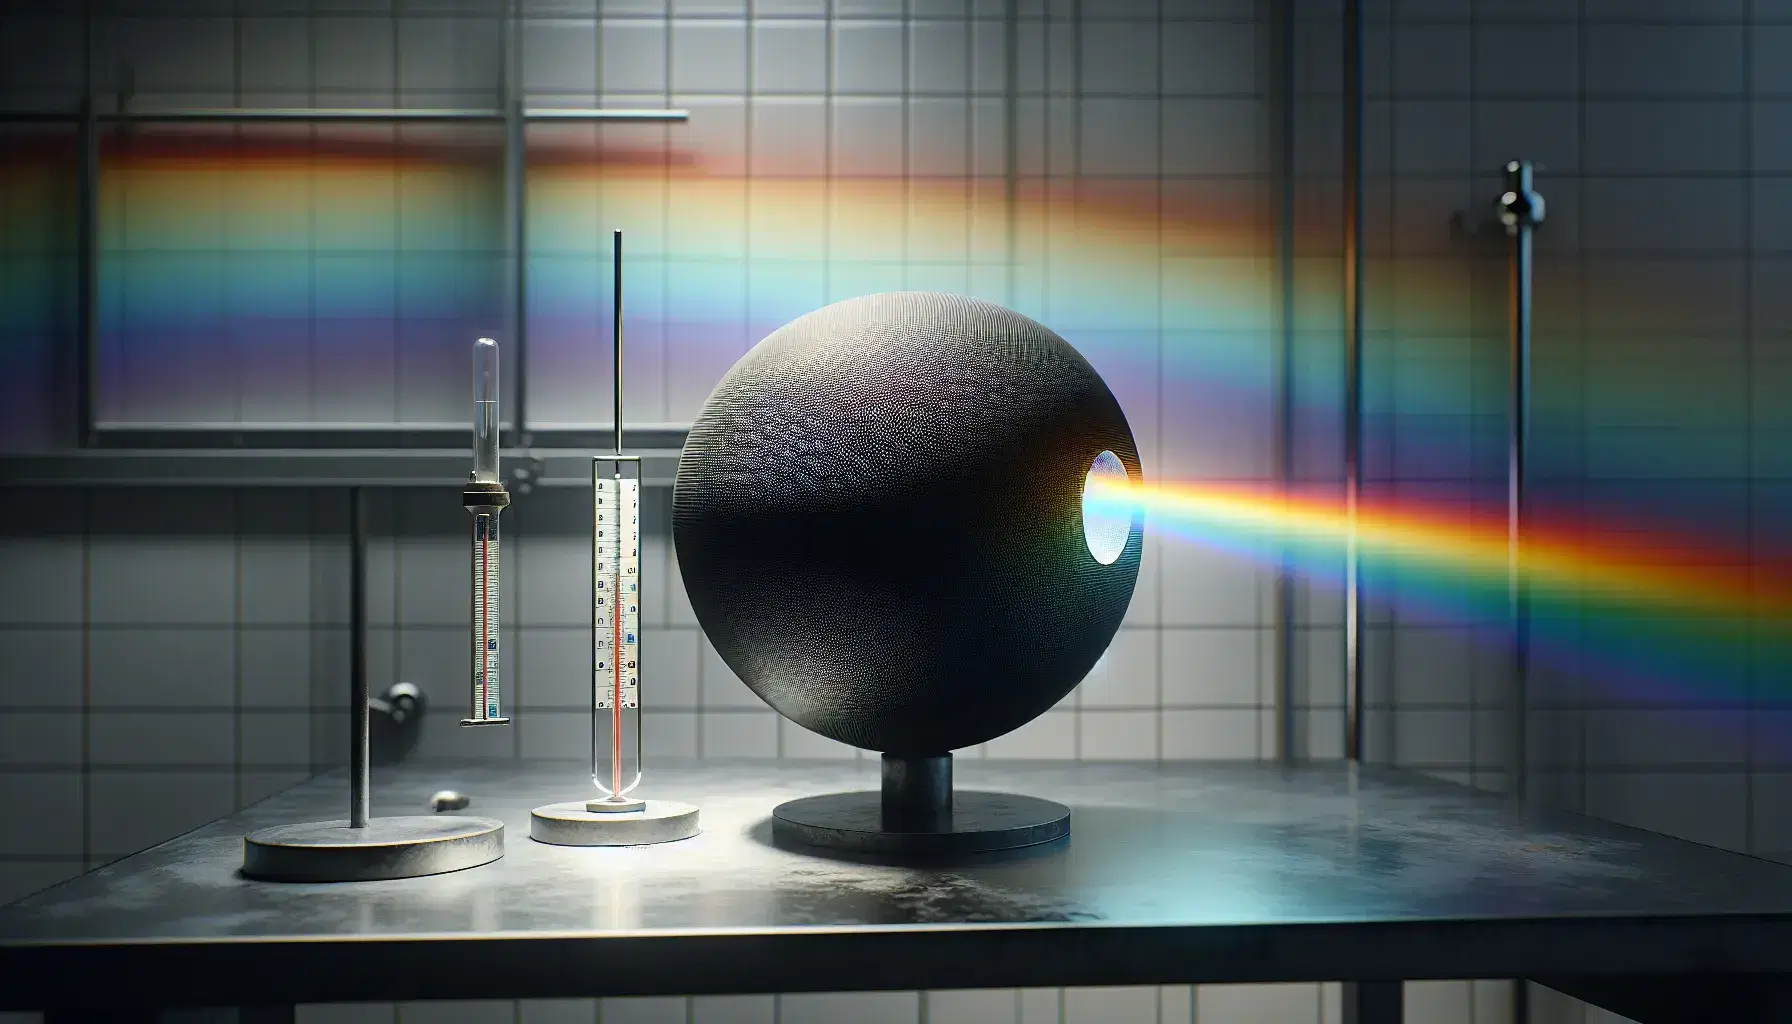 Laboratory blackbody radiator on a table with a prism dispersing a beam of light into a color spectrum on the wall, and a mercury thermometer in the foreground.